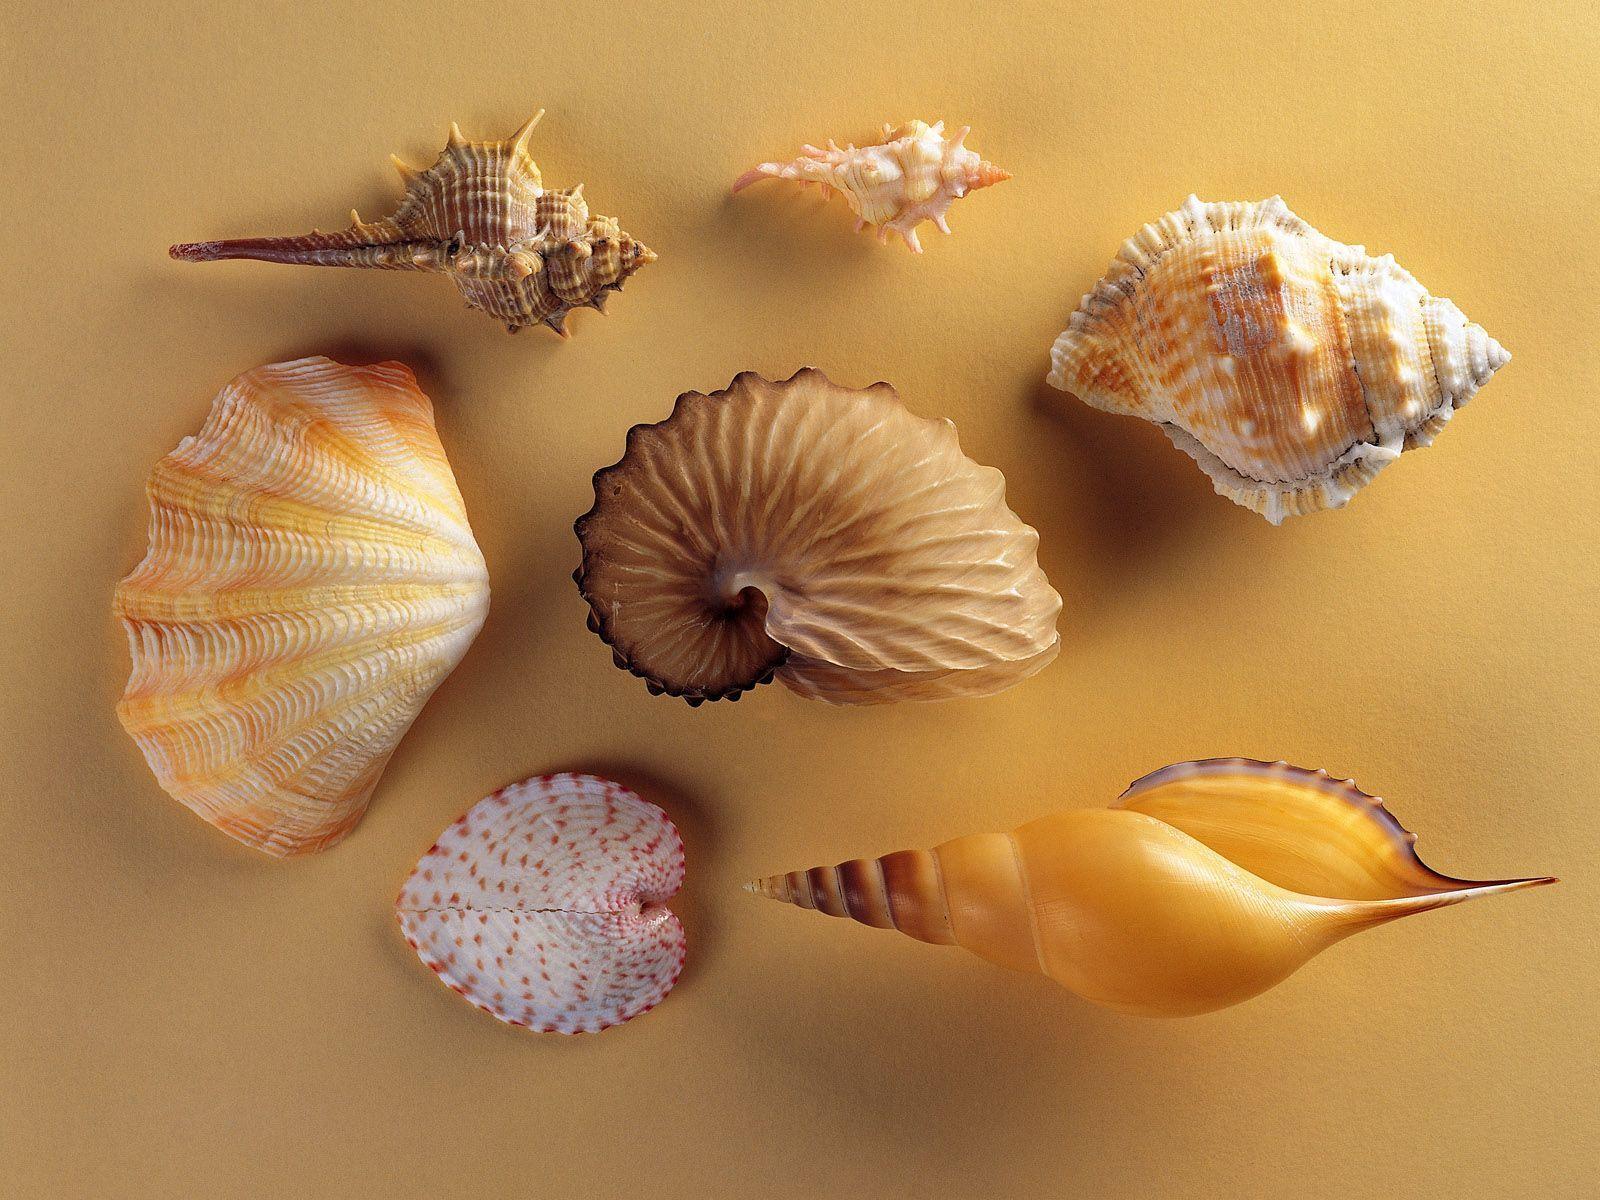 Shell Wallpapers